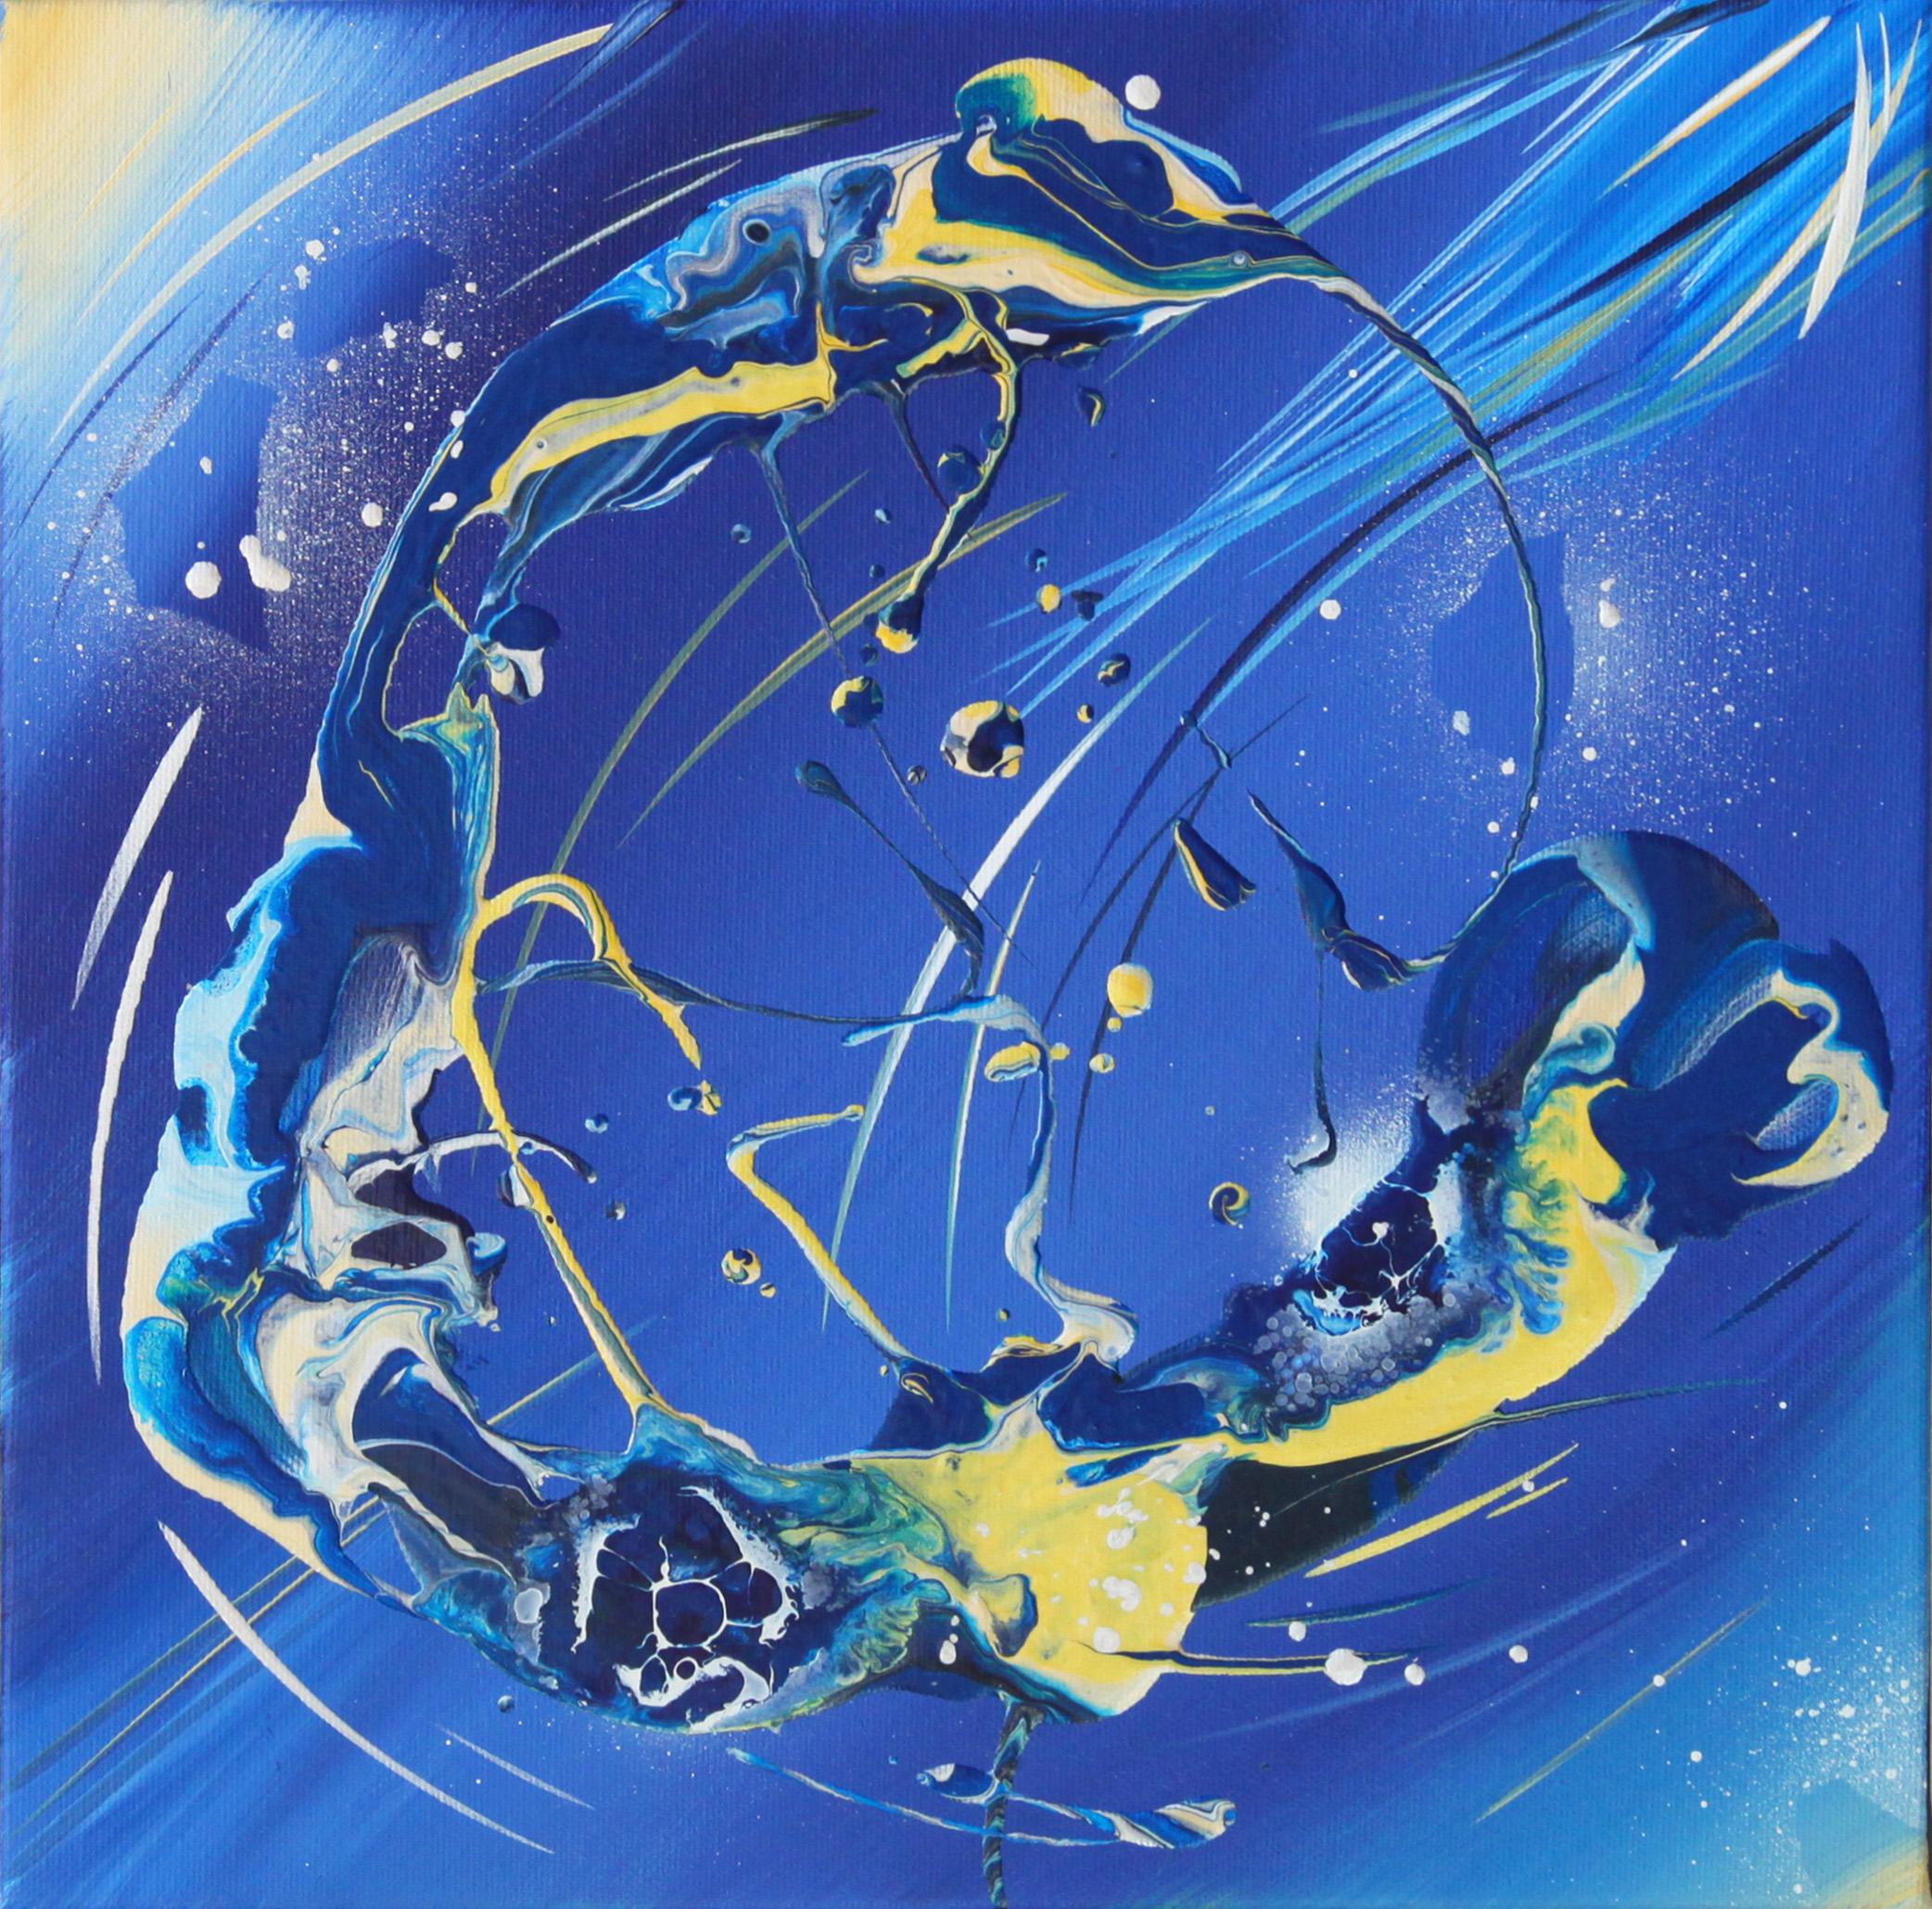 Michael Carini Abstract Painting - Abstract Expressionist Painting, "Van Gogh's Shooting Stars 7"